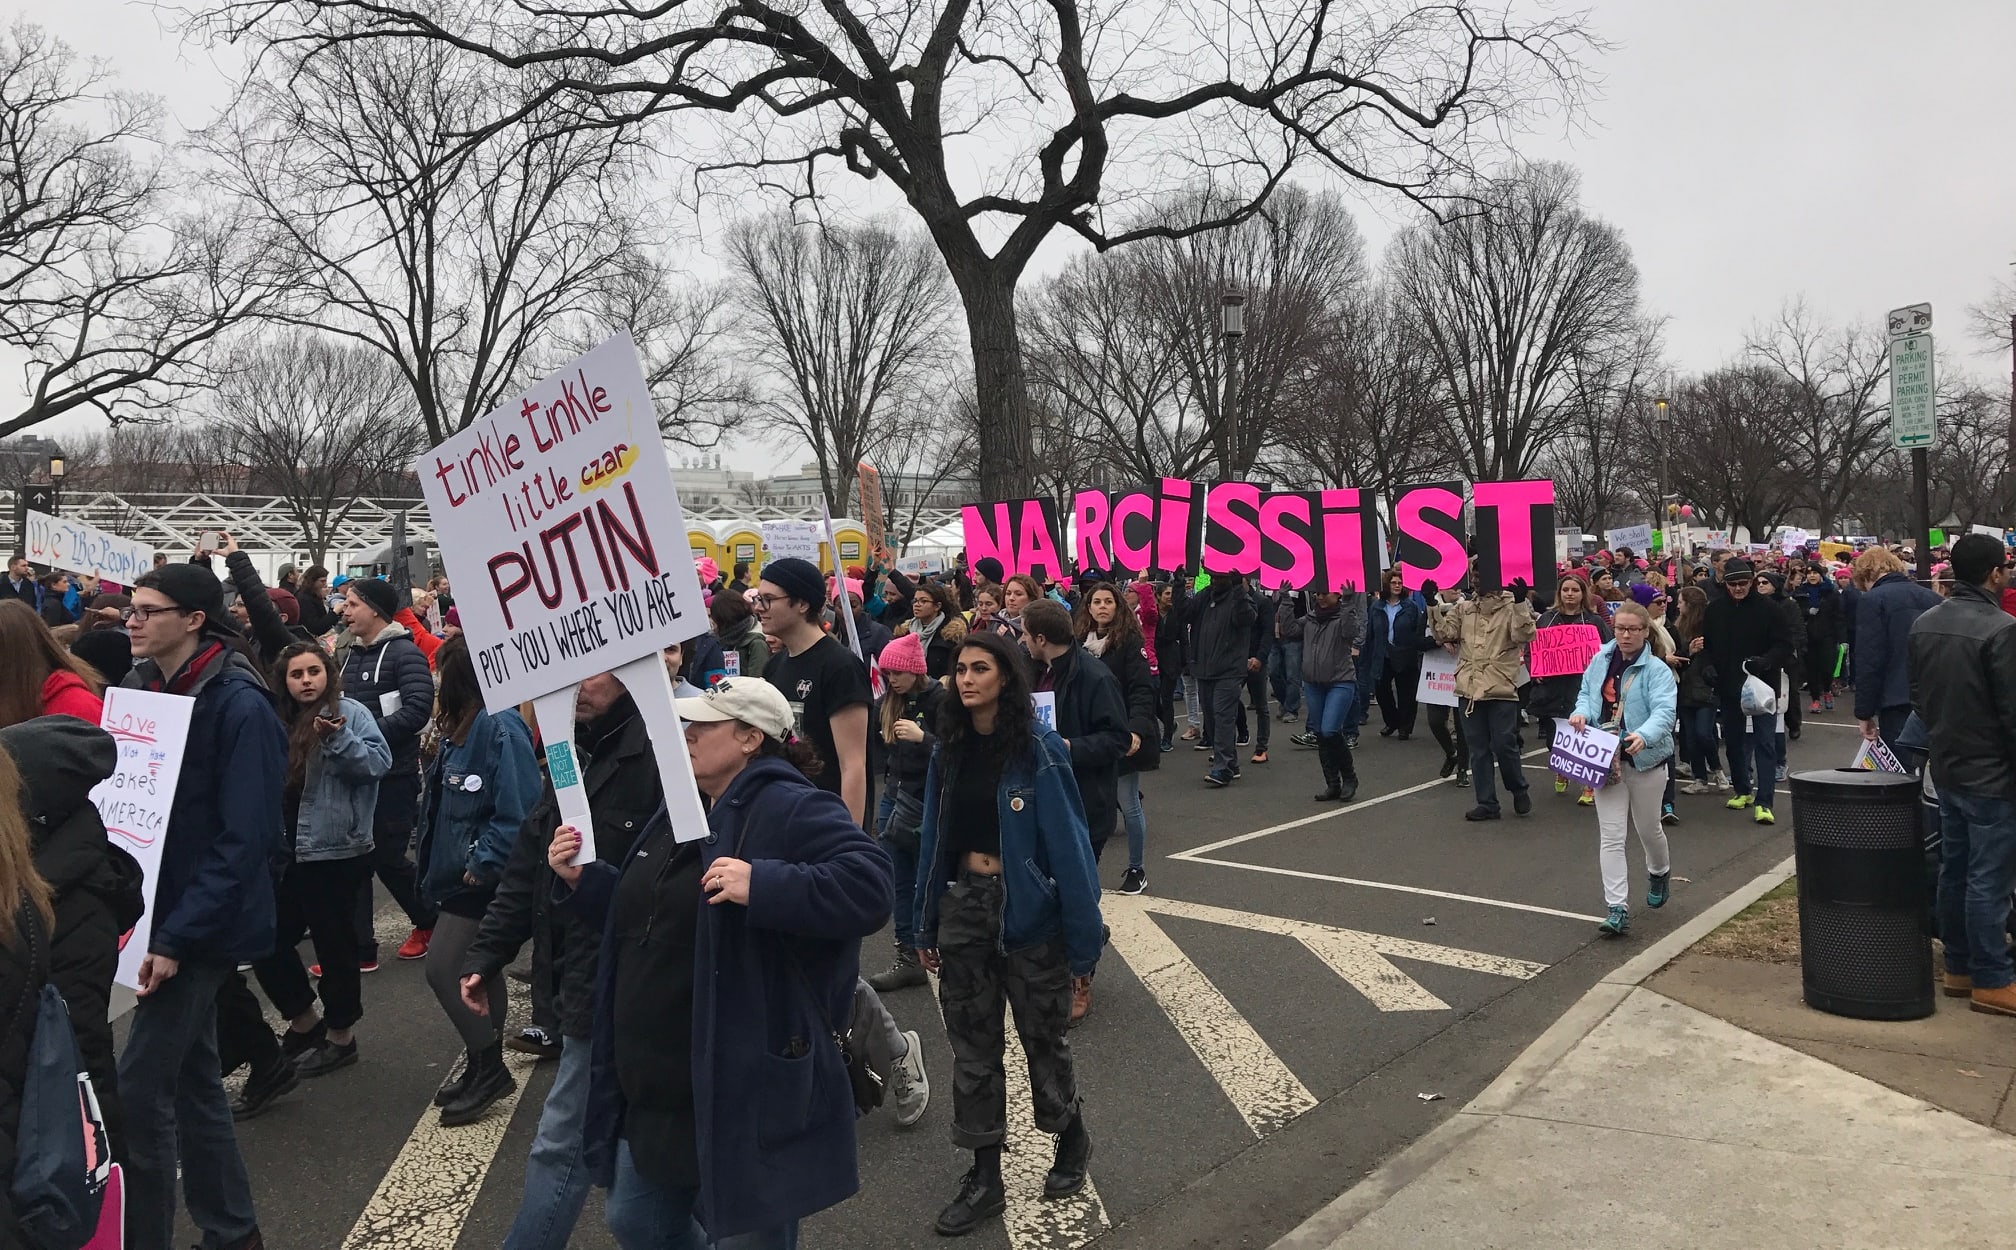 Marchers at the Washington DC event.